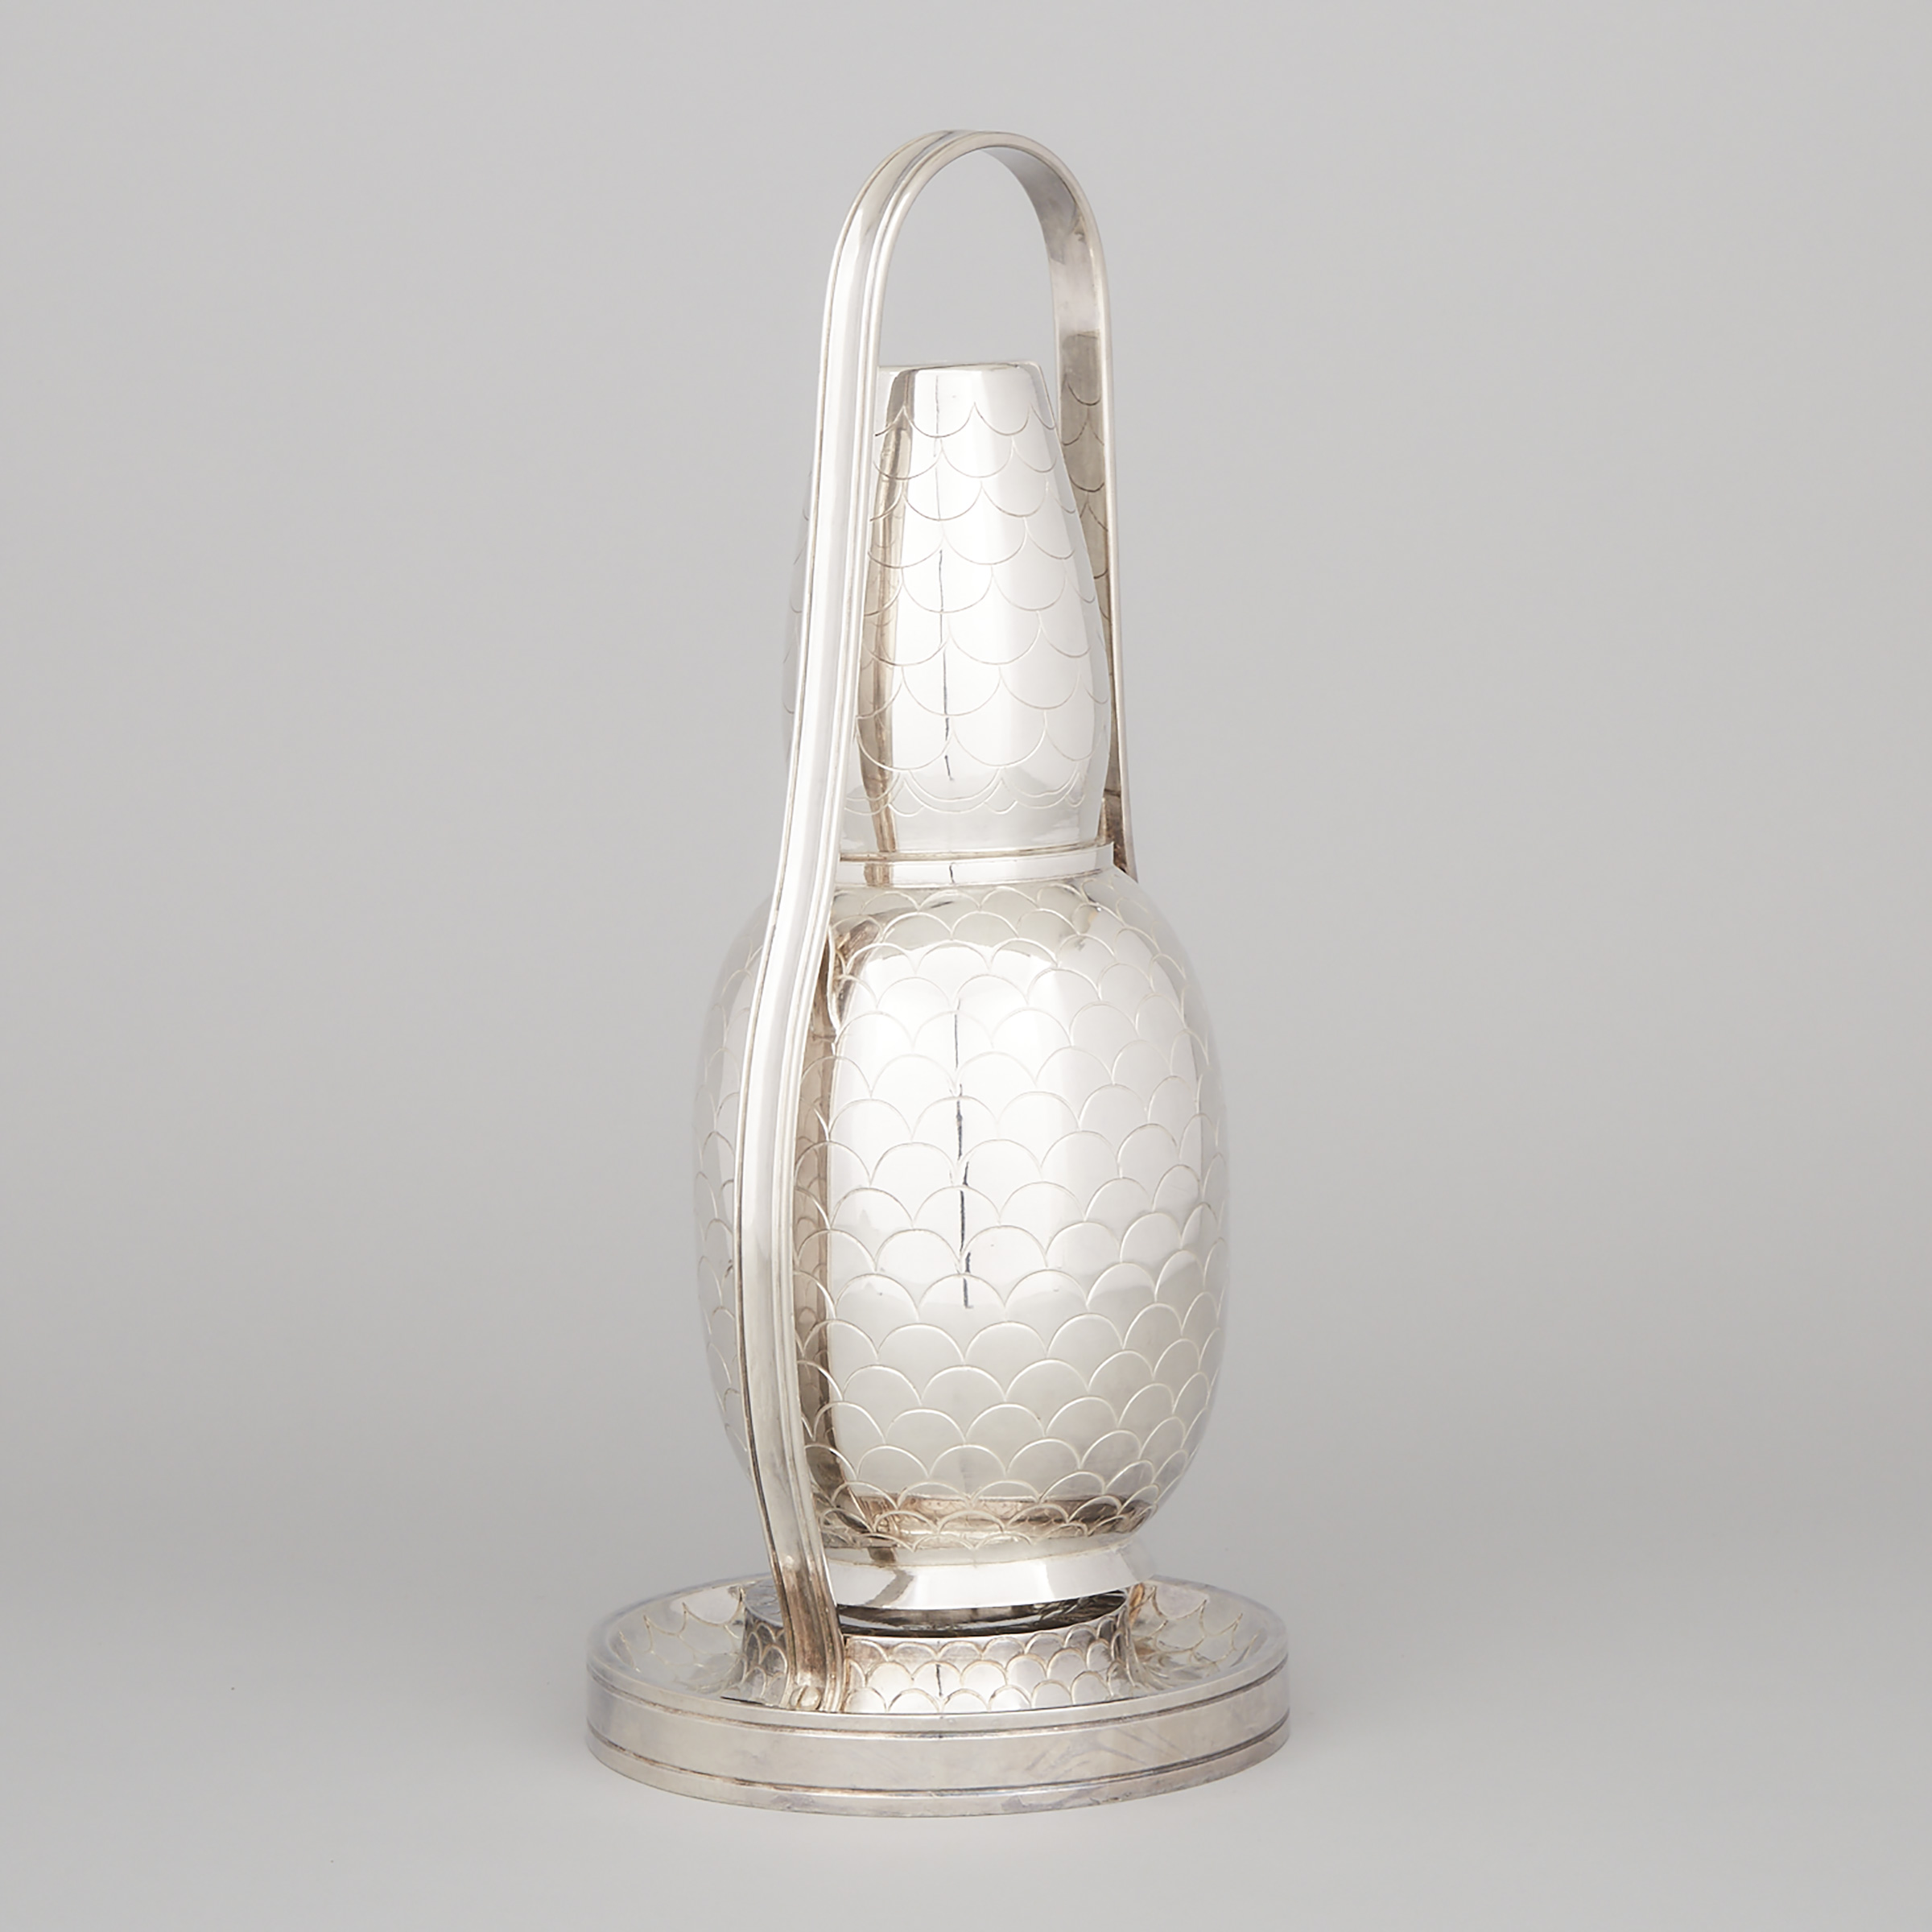 Indian Silver Bottle Holder and Stand, 20th century